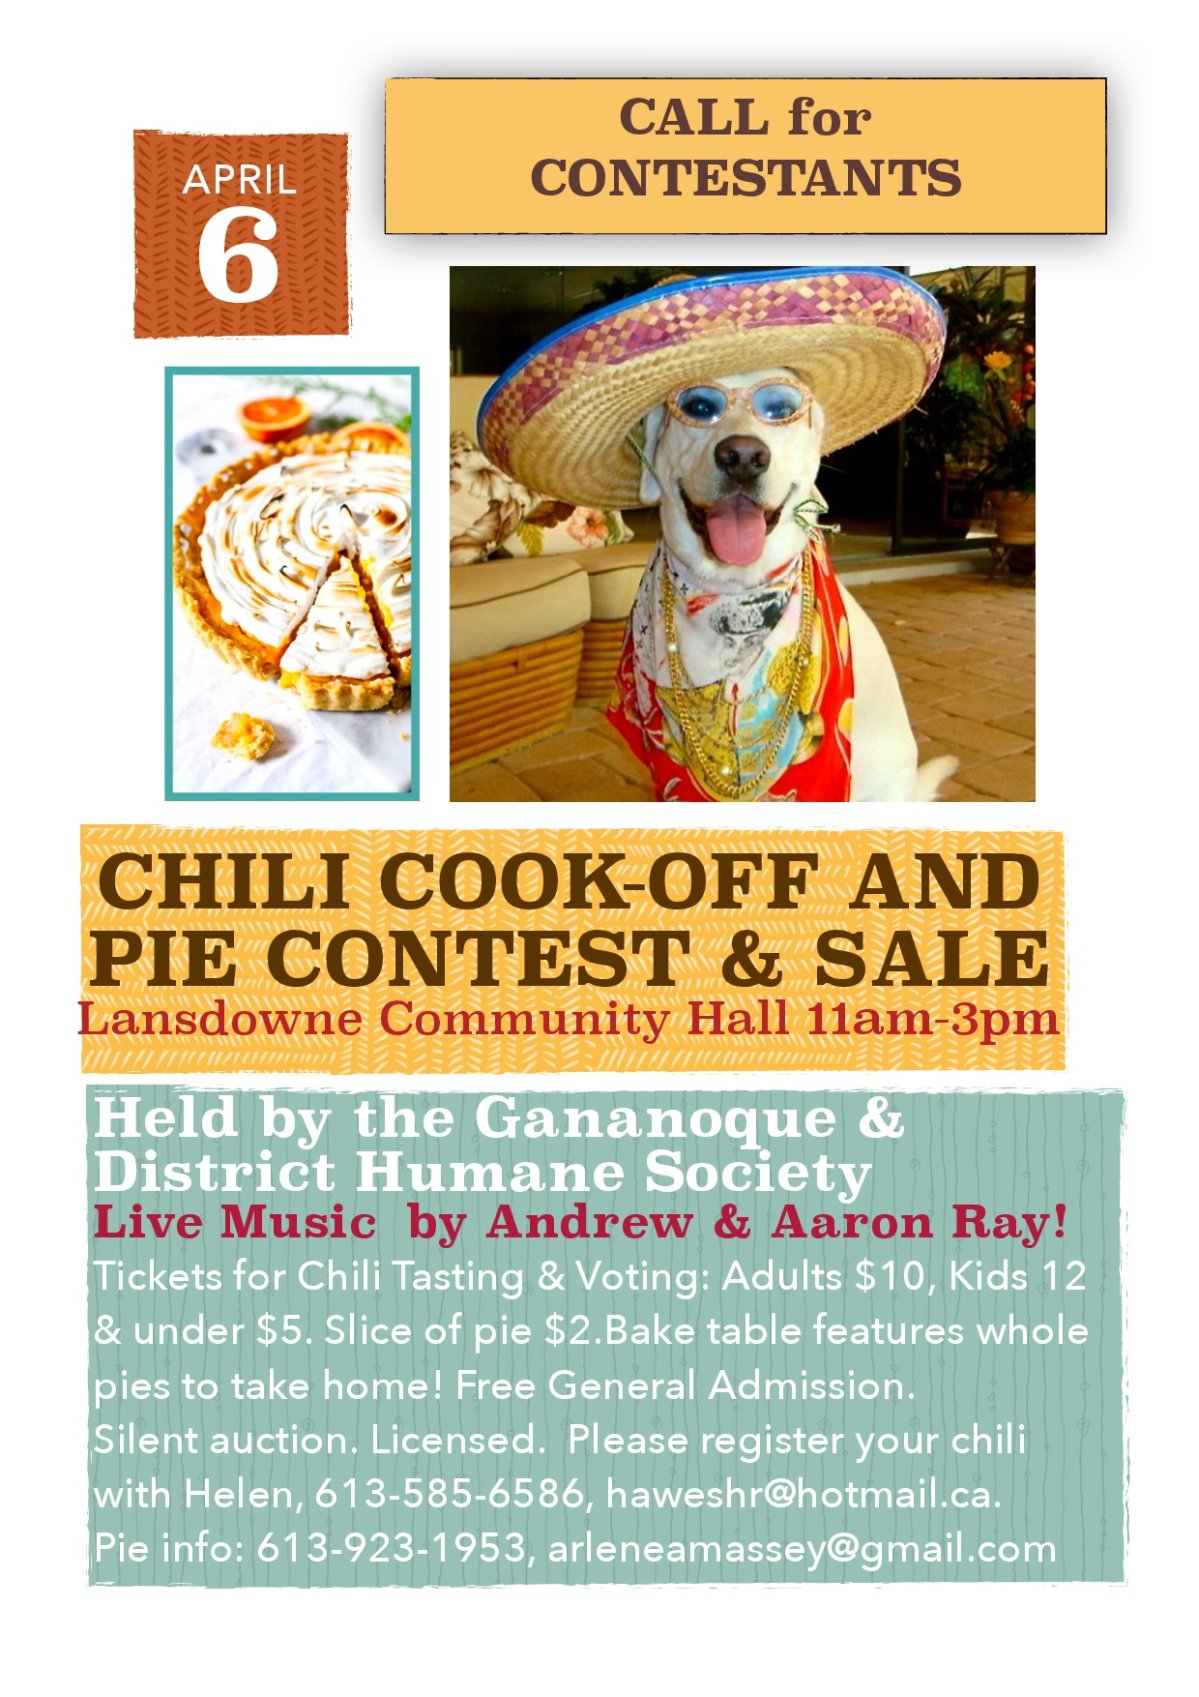 Chili Cook-Off and Pie Contest, Gananoque & District Humane Society - image